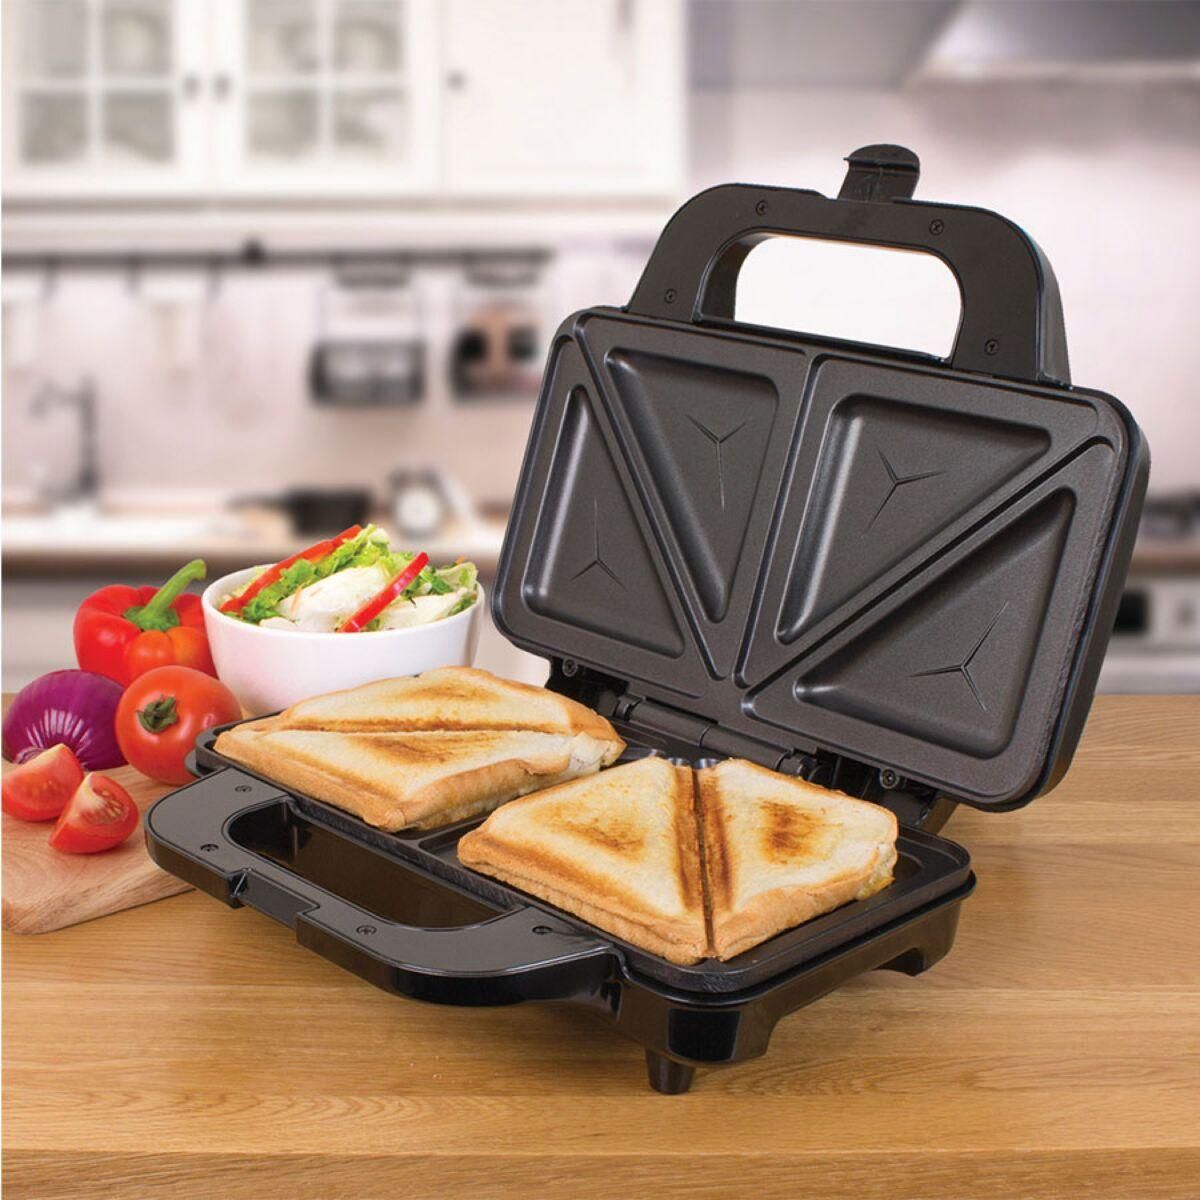 Stainless Steel Sandwich Maker Automatic Temp Control Cool Touch Handle Easy to Clean Toastie Maker with Non-Stick Plates Sandwich Toaster Ultracompact